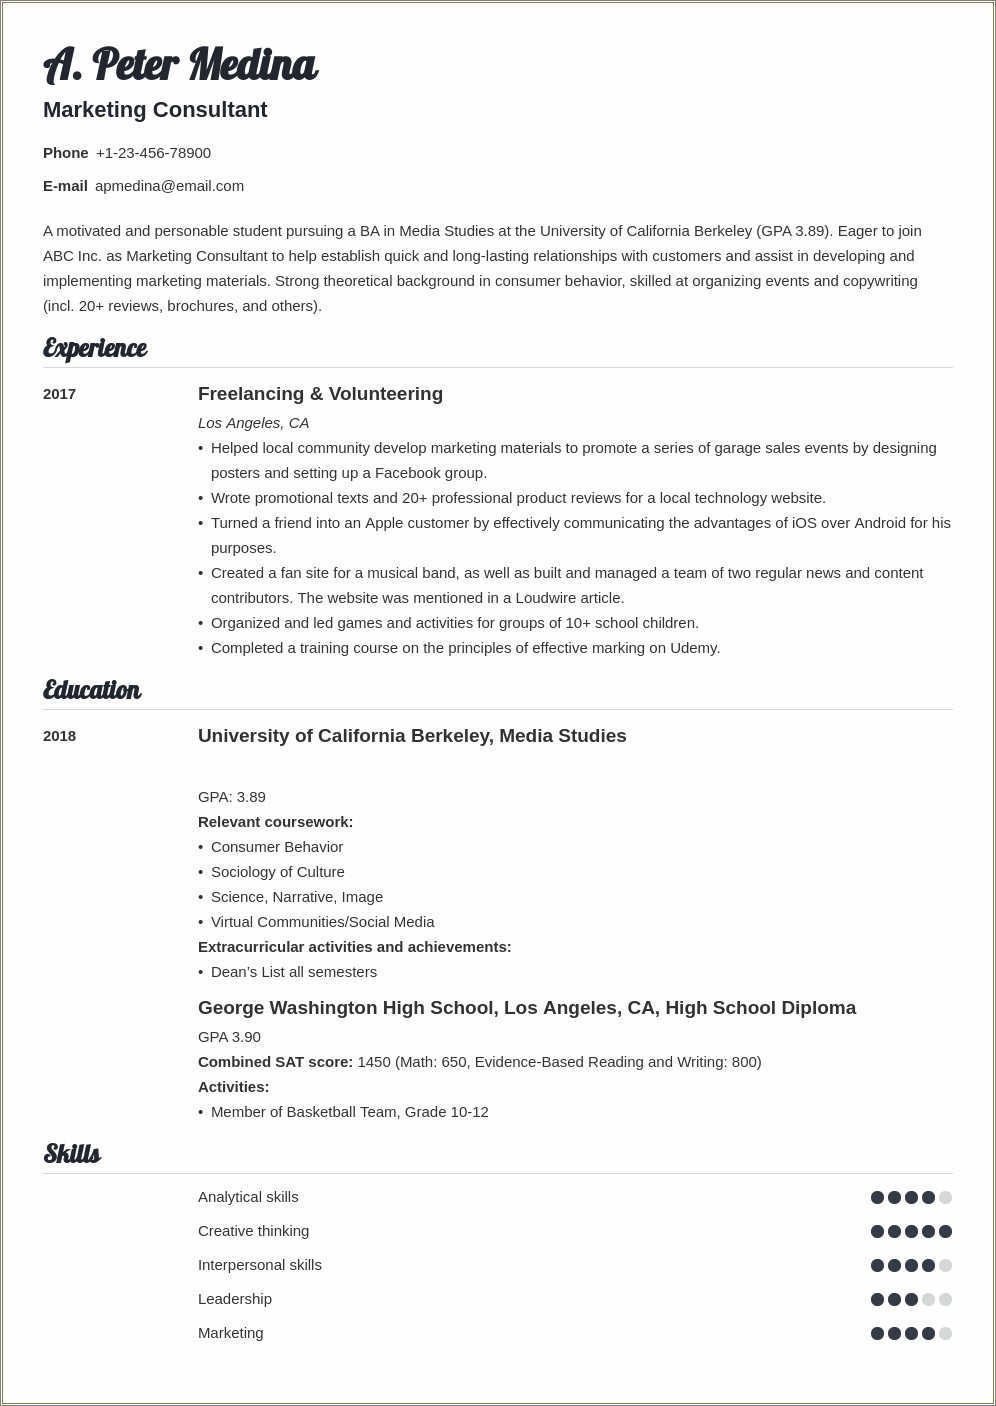 Objective Statement Resume Good Or Bad